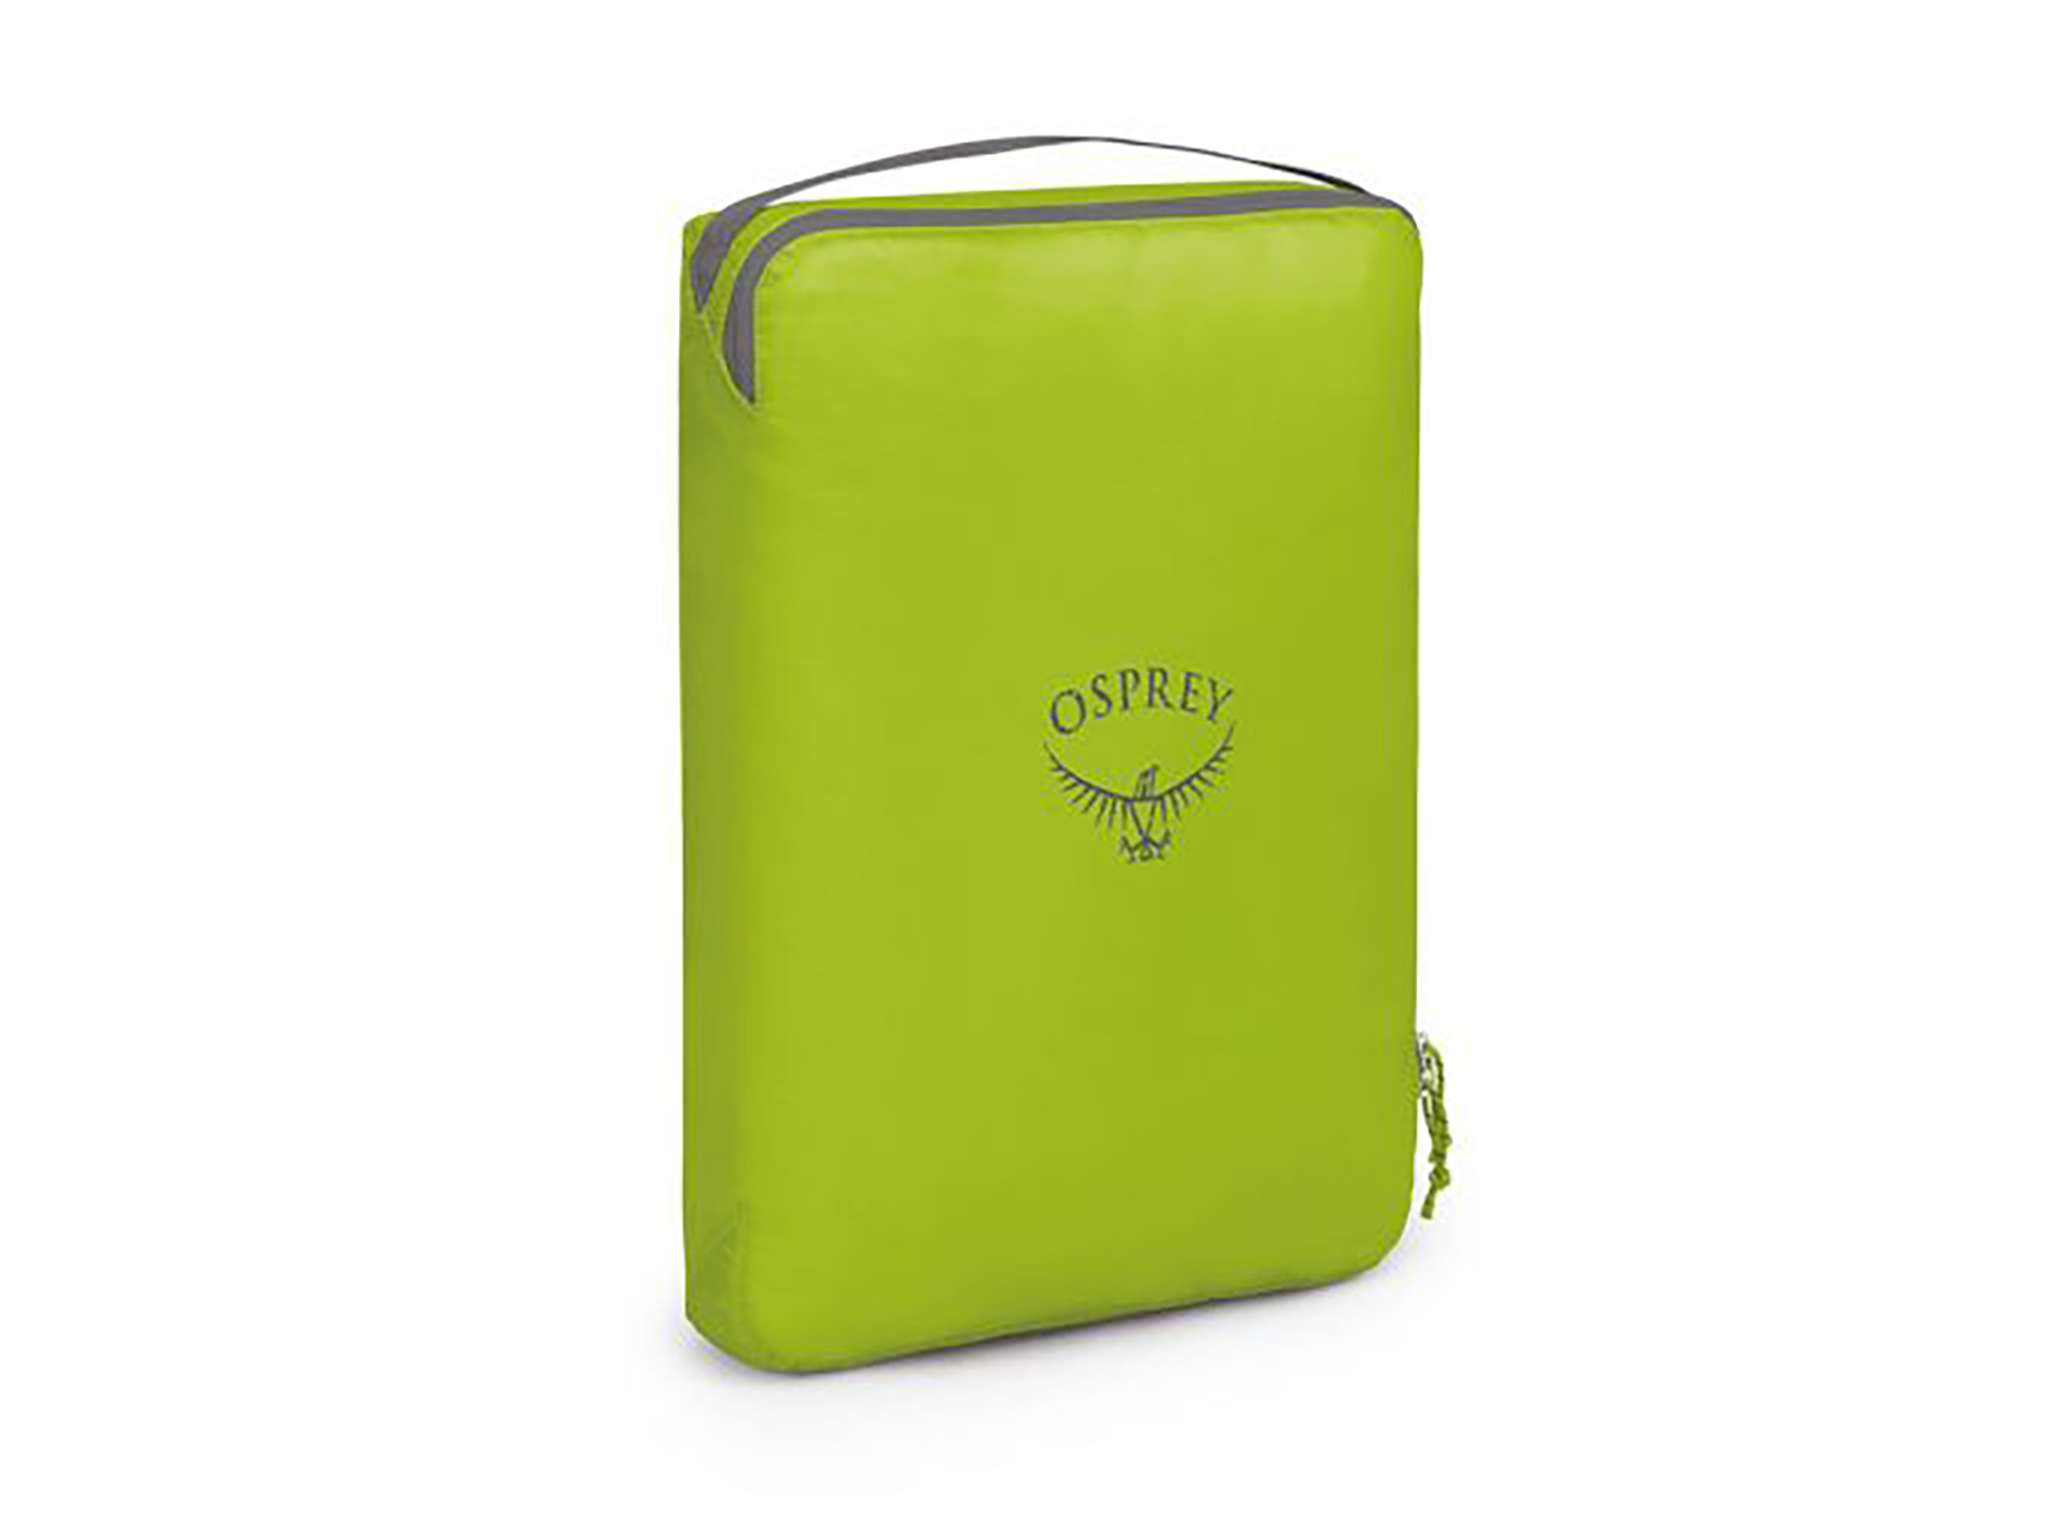 Osprey packing cube